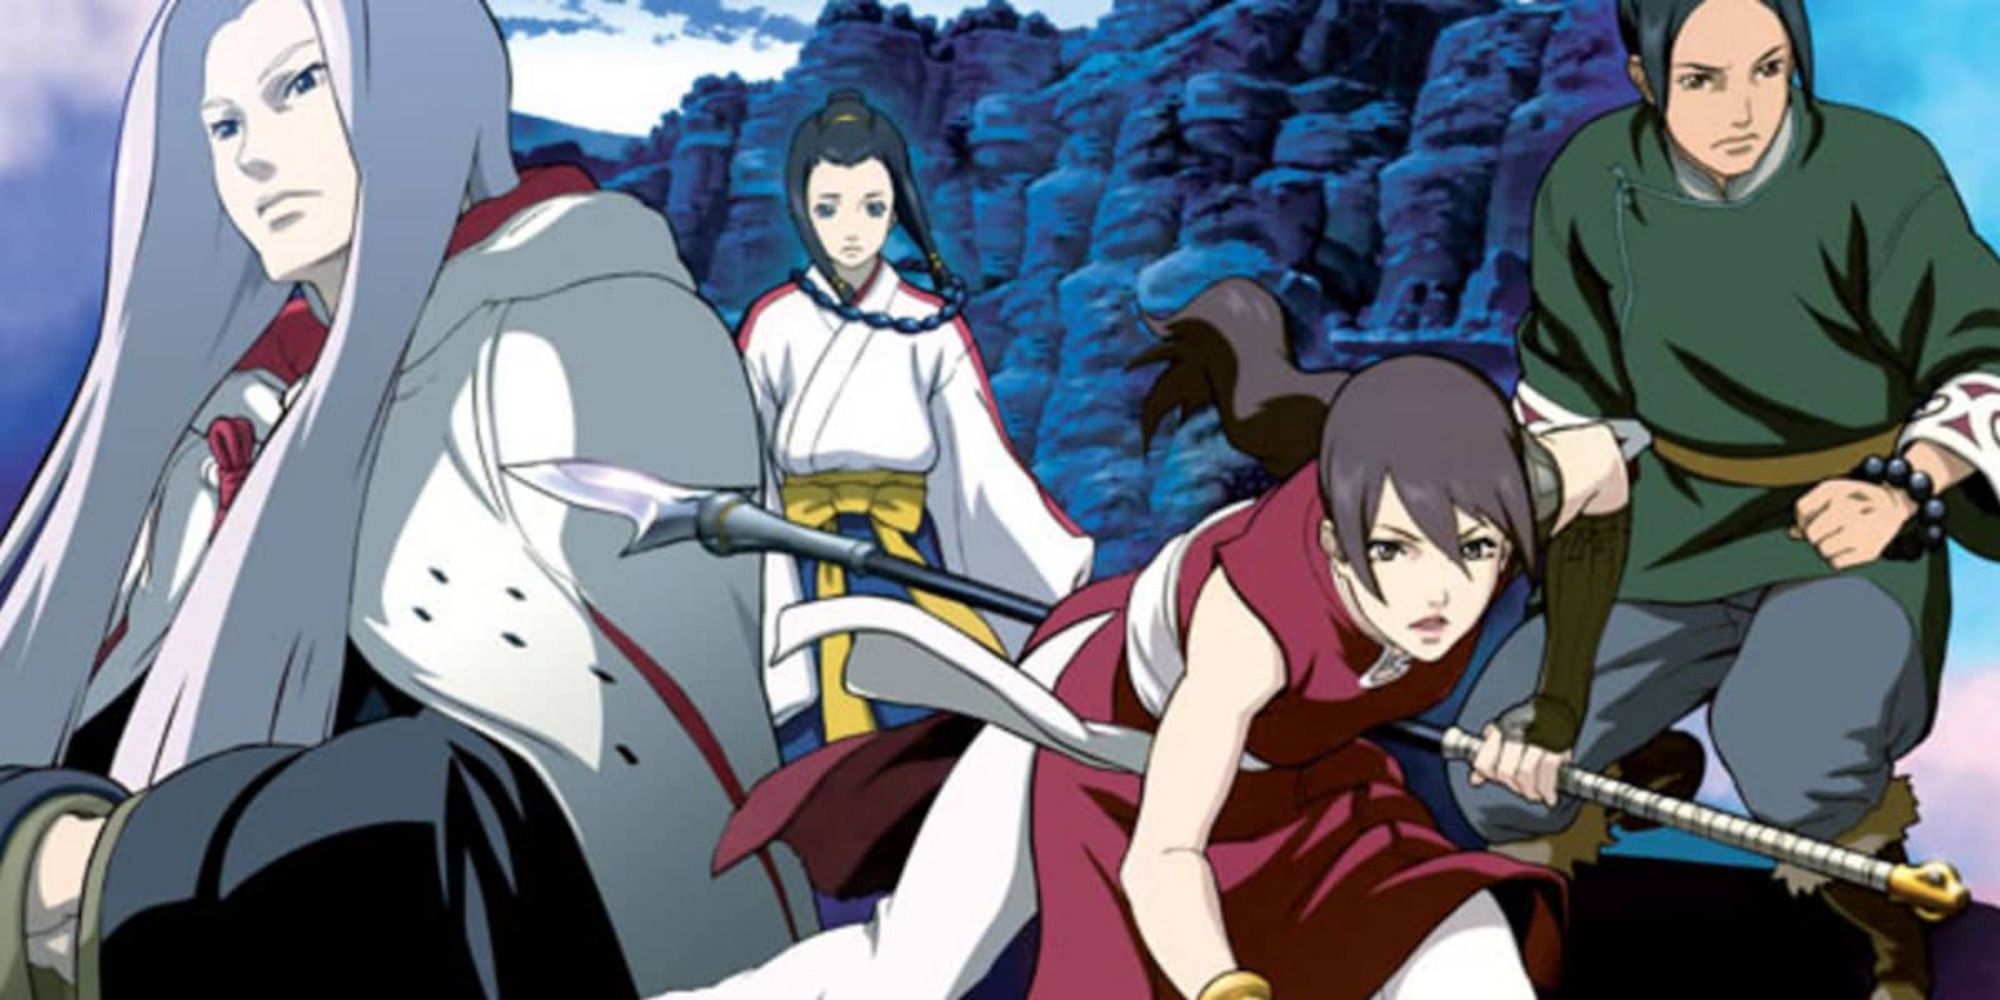 Promo art featuring characters from Moribito: Guardian of the Spirit